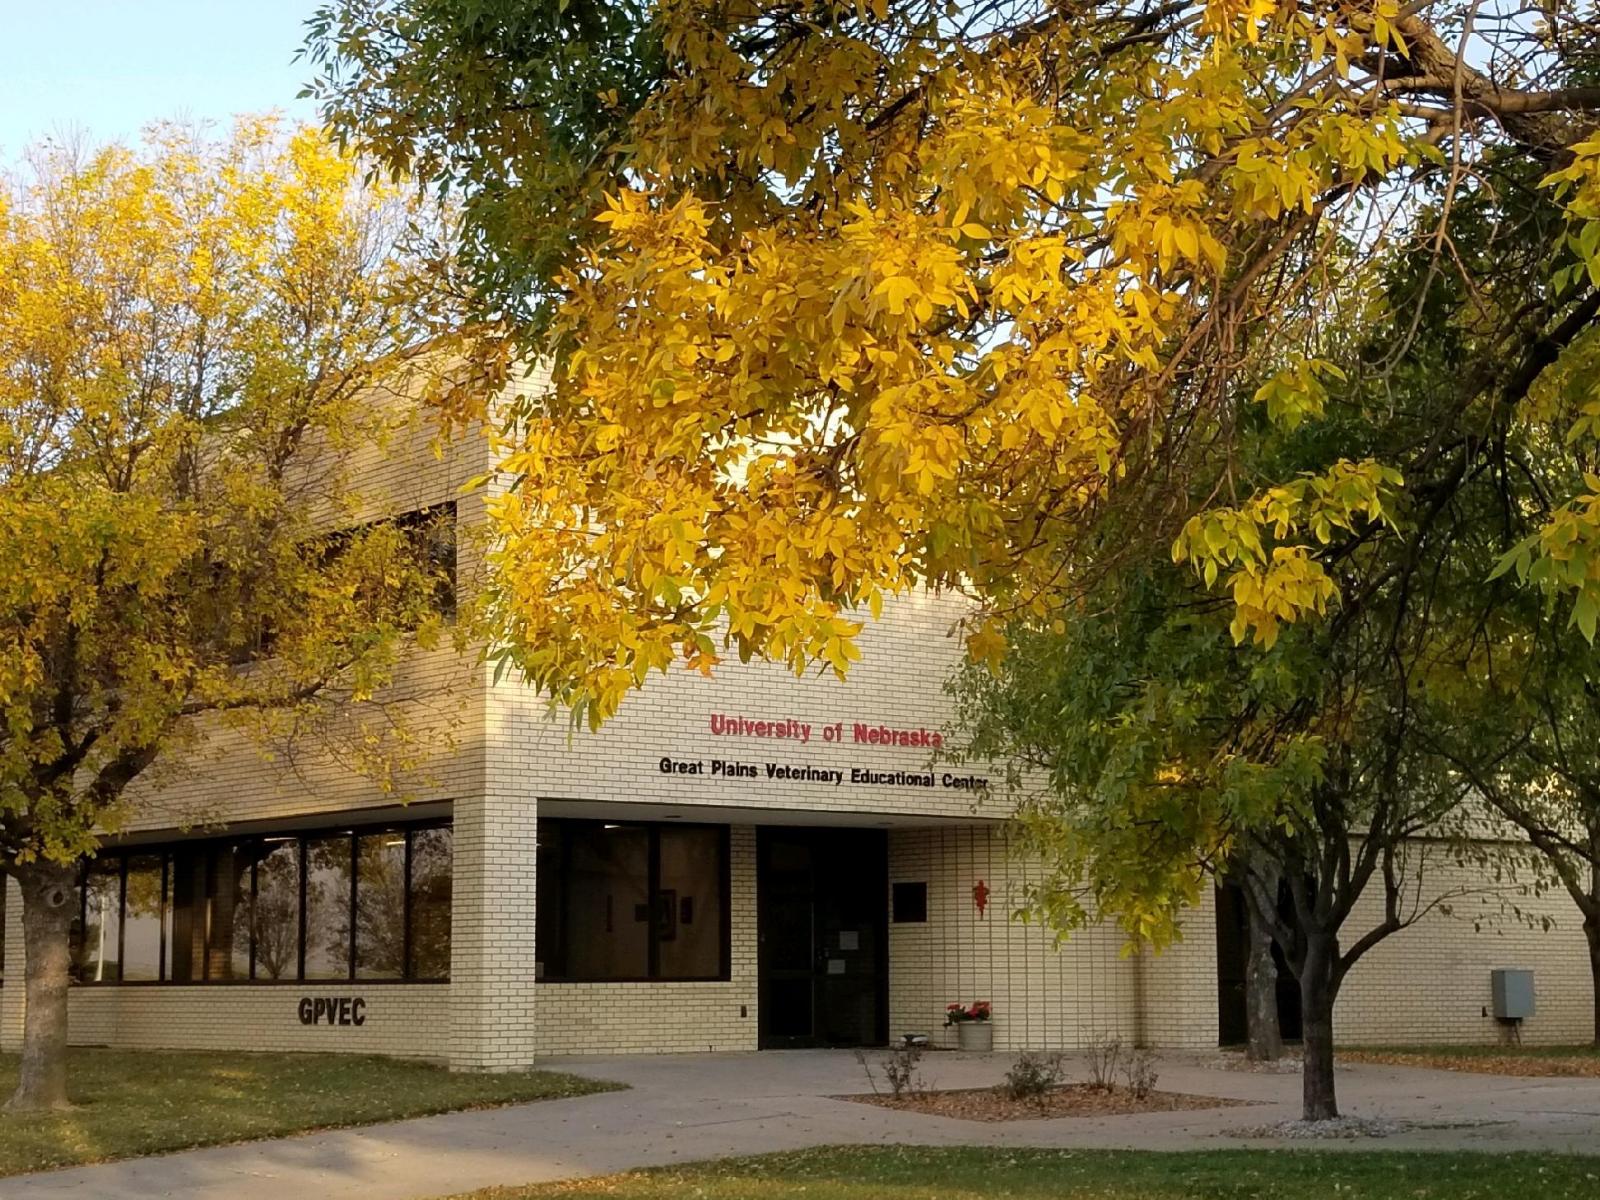 Exterior of the Great Plains Veterinary Educational Center